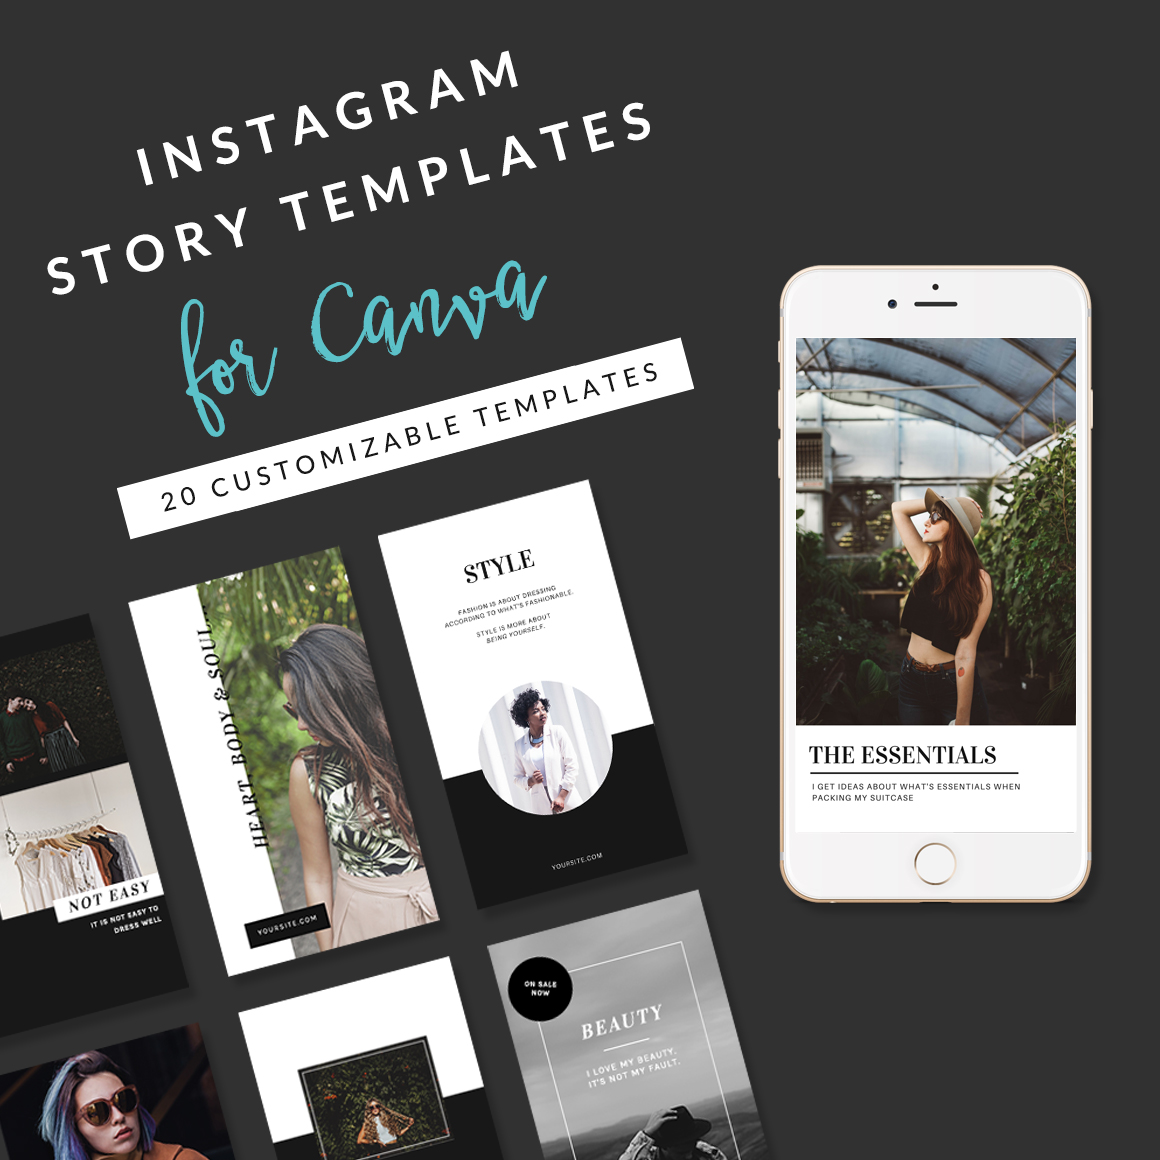 How To See All Your Instagram Stories | lupon.gov.ph